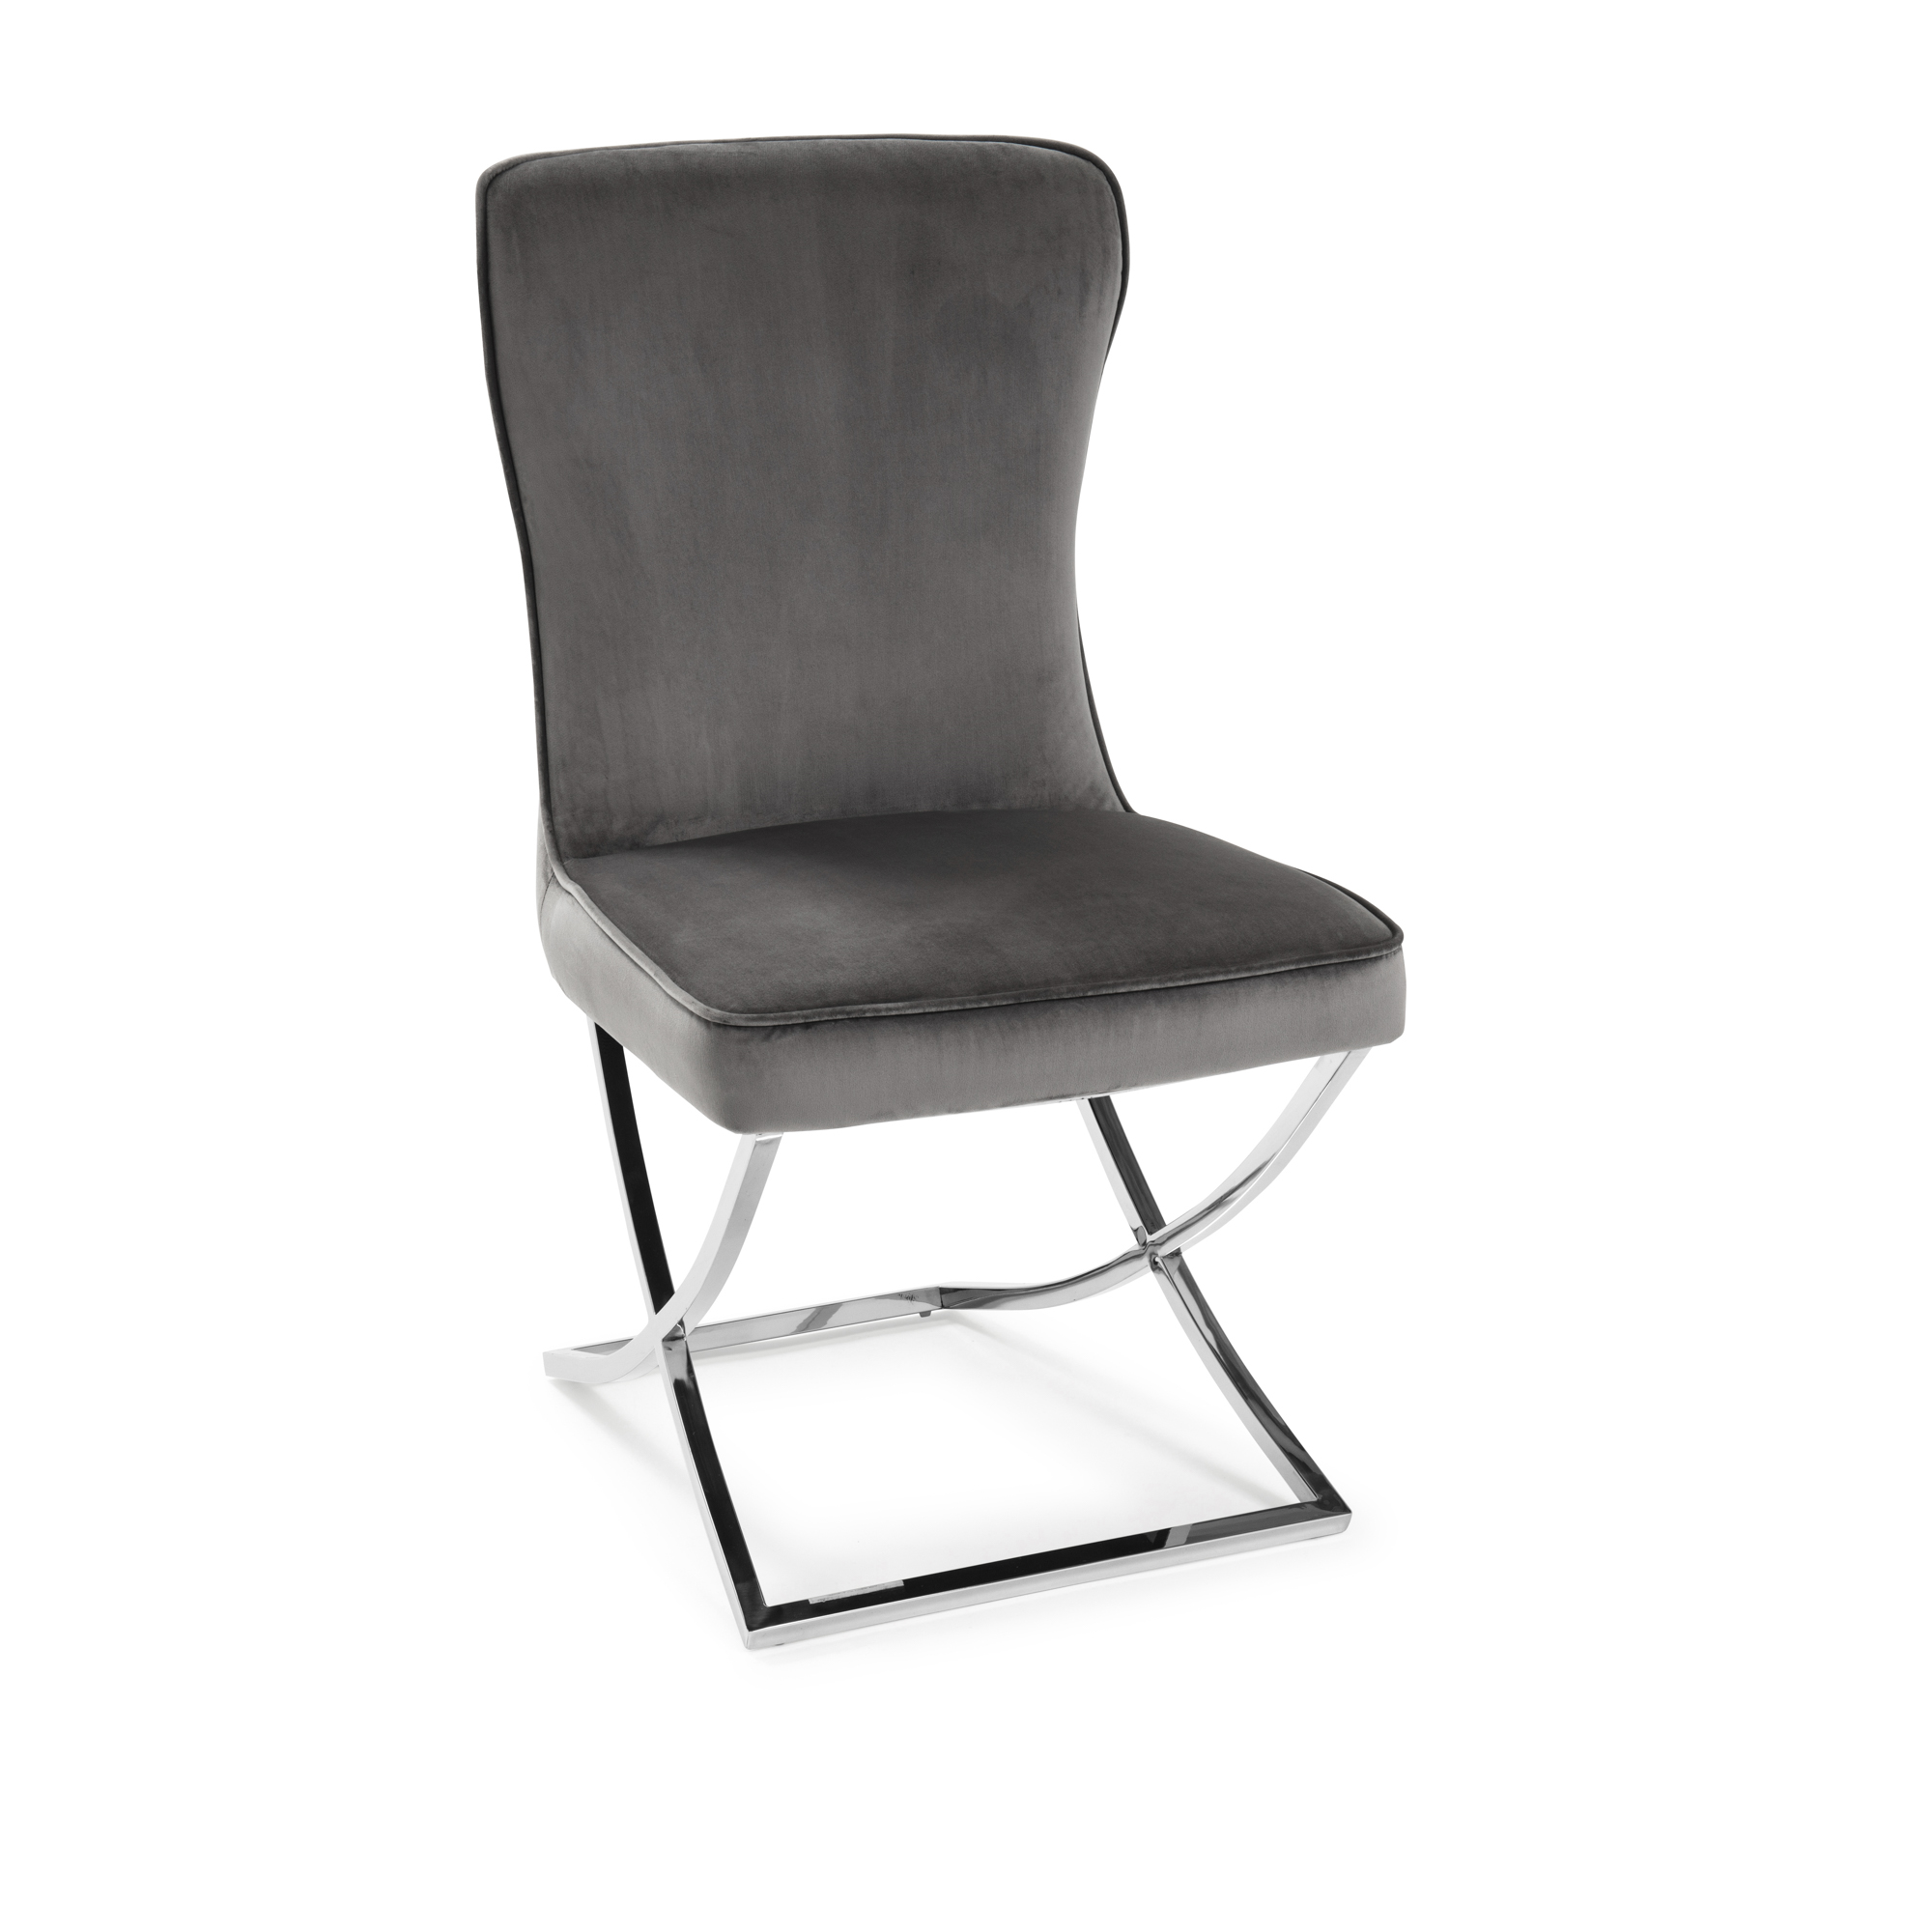 (Set of 2) Cheshire Grey Brushed Velvet Dining Chair with a Stainless Steel Cross Leg